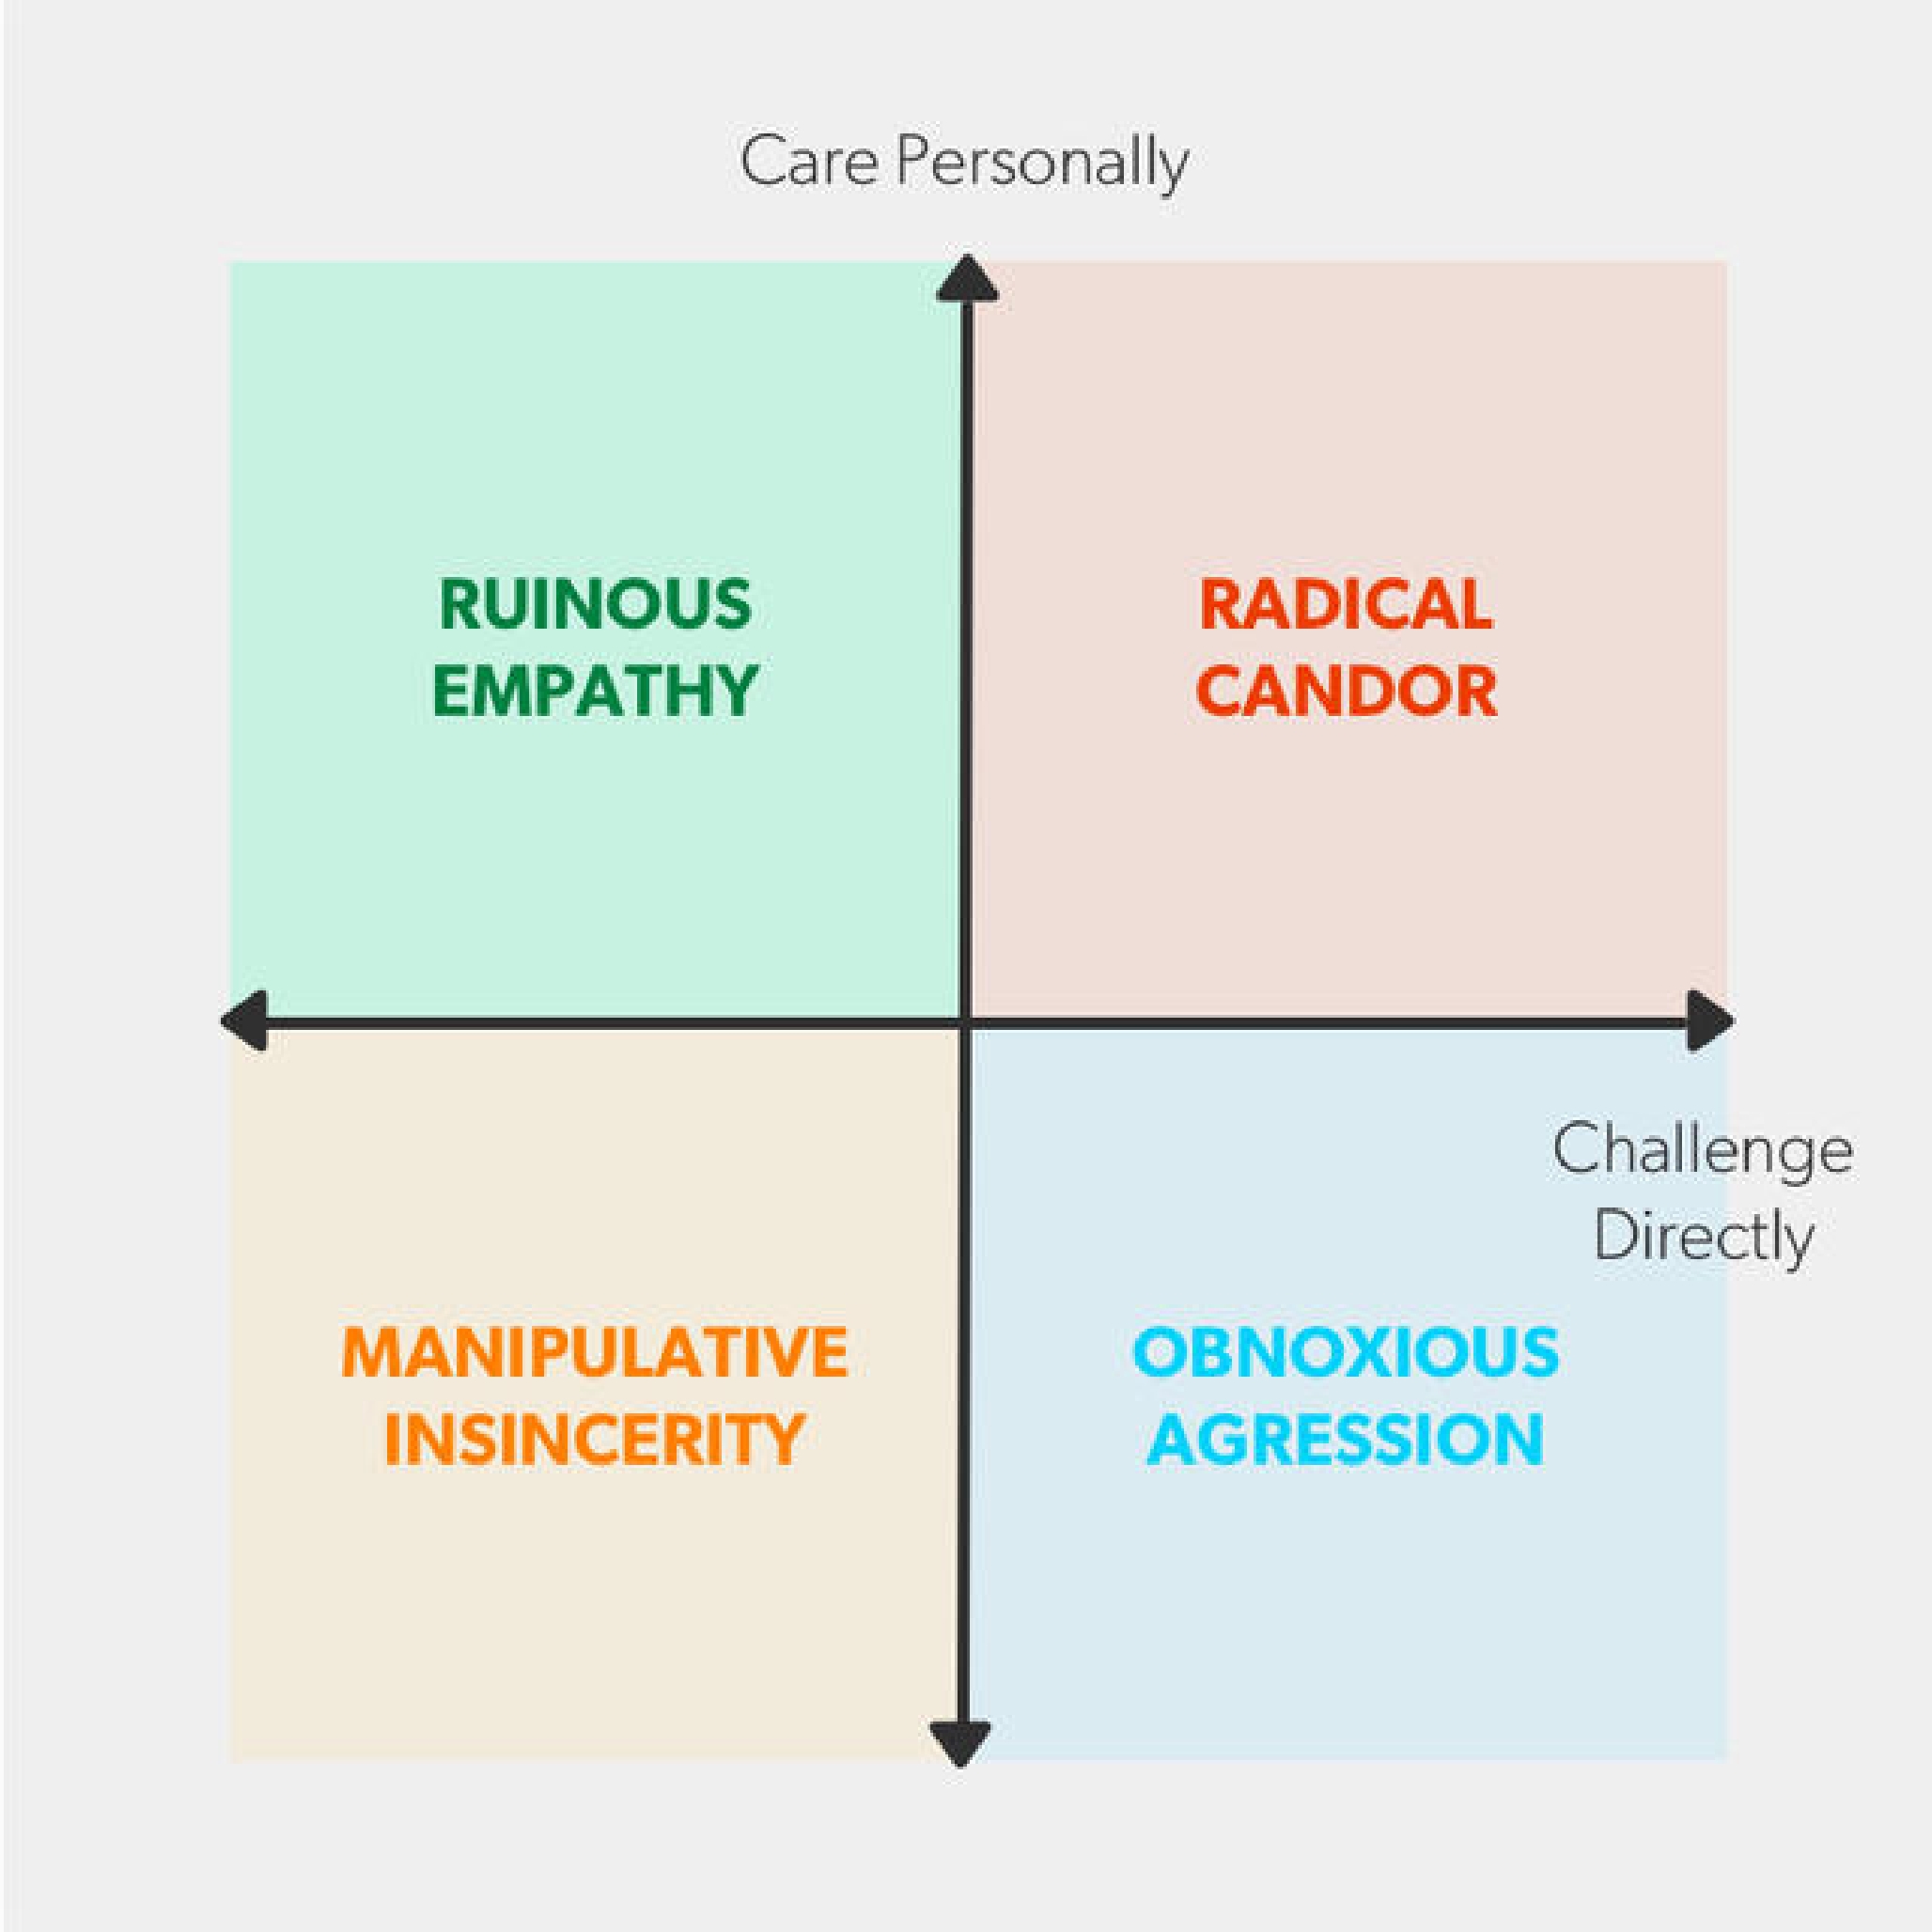 Top 10 takeaways from Radical Candor